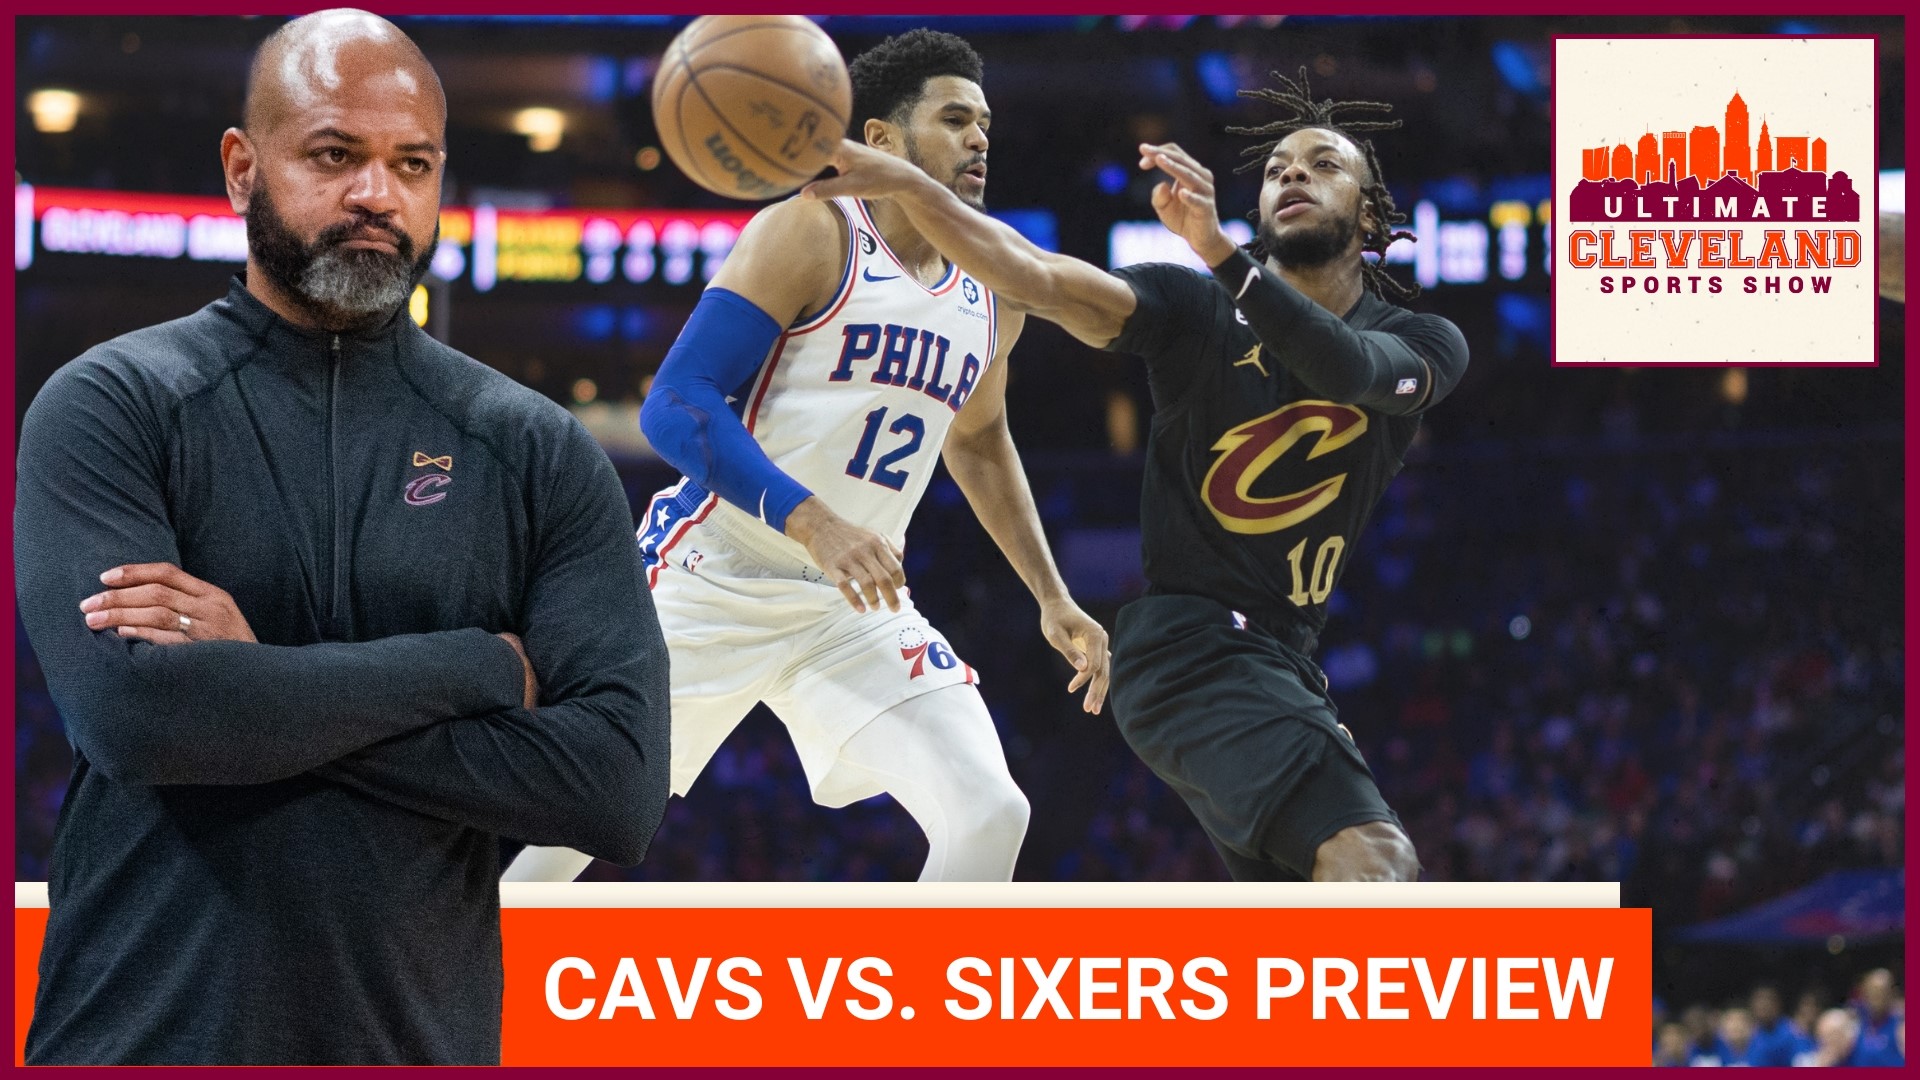 The Cleveland Cavaliers host the Philadelphia 76ers at home on national tv | Is this another statement game?